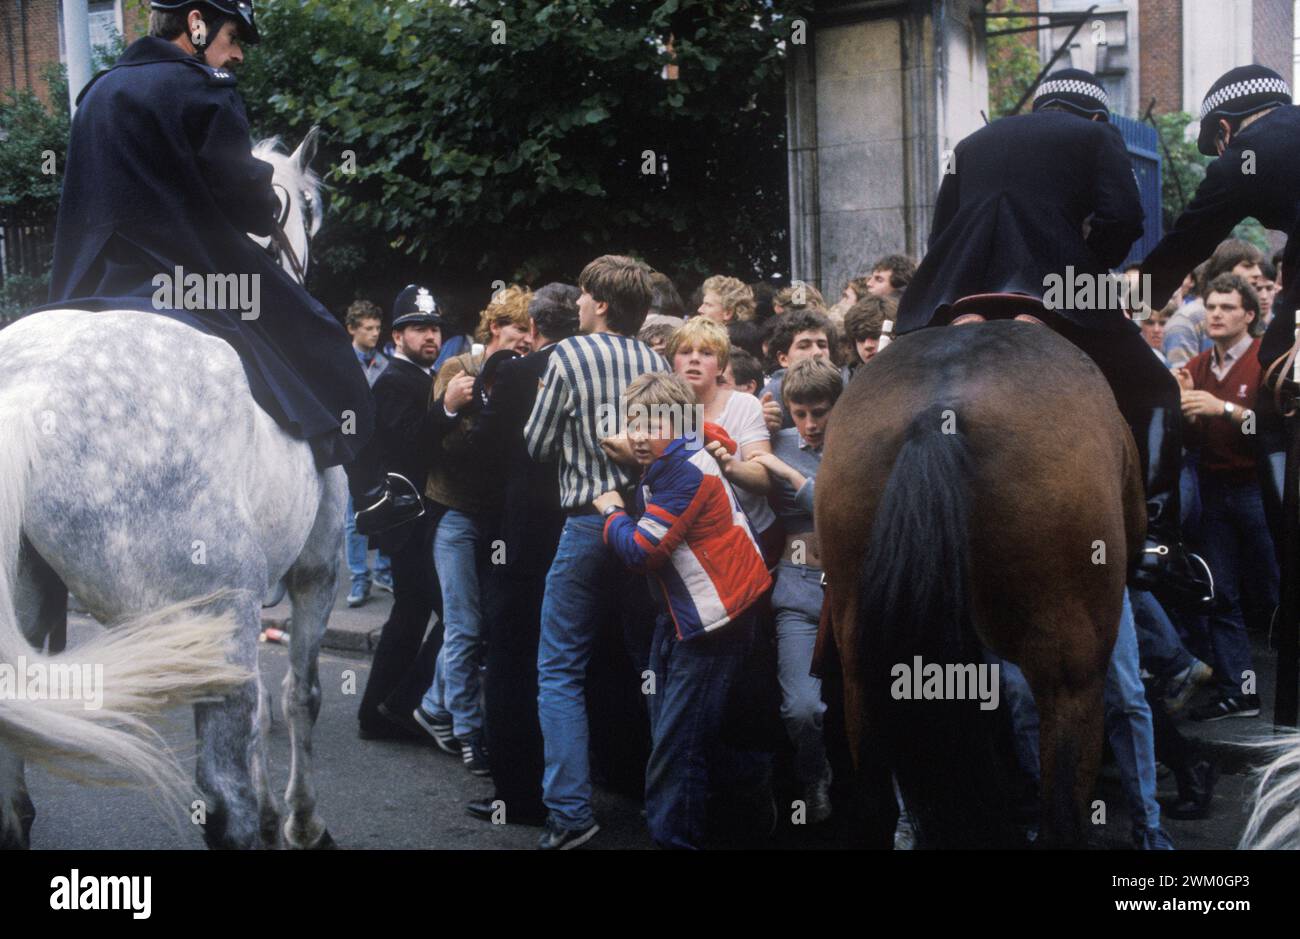 Chelsea Stamford Bridge football ground 1980s UK. Arsenal young football fans after a game (Chelsea v Arsenal) Police crowd control on horseback. London, England 1985. England HOMER SYKES Stock Photo